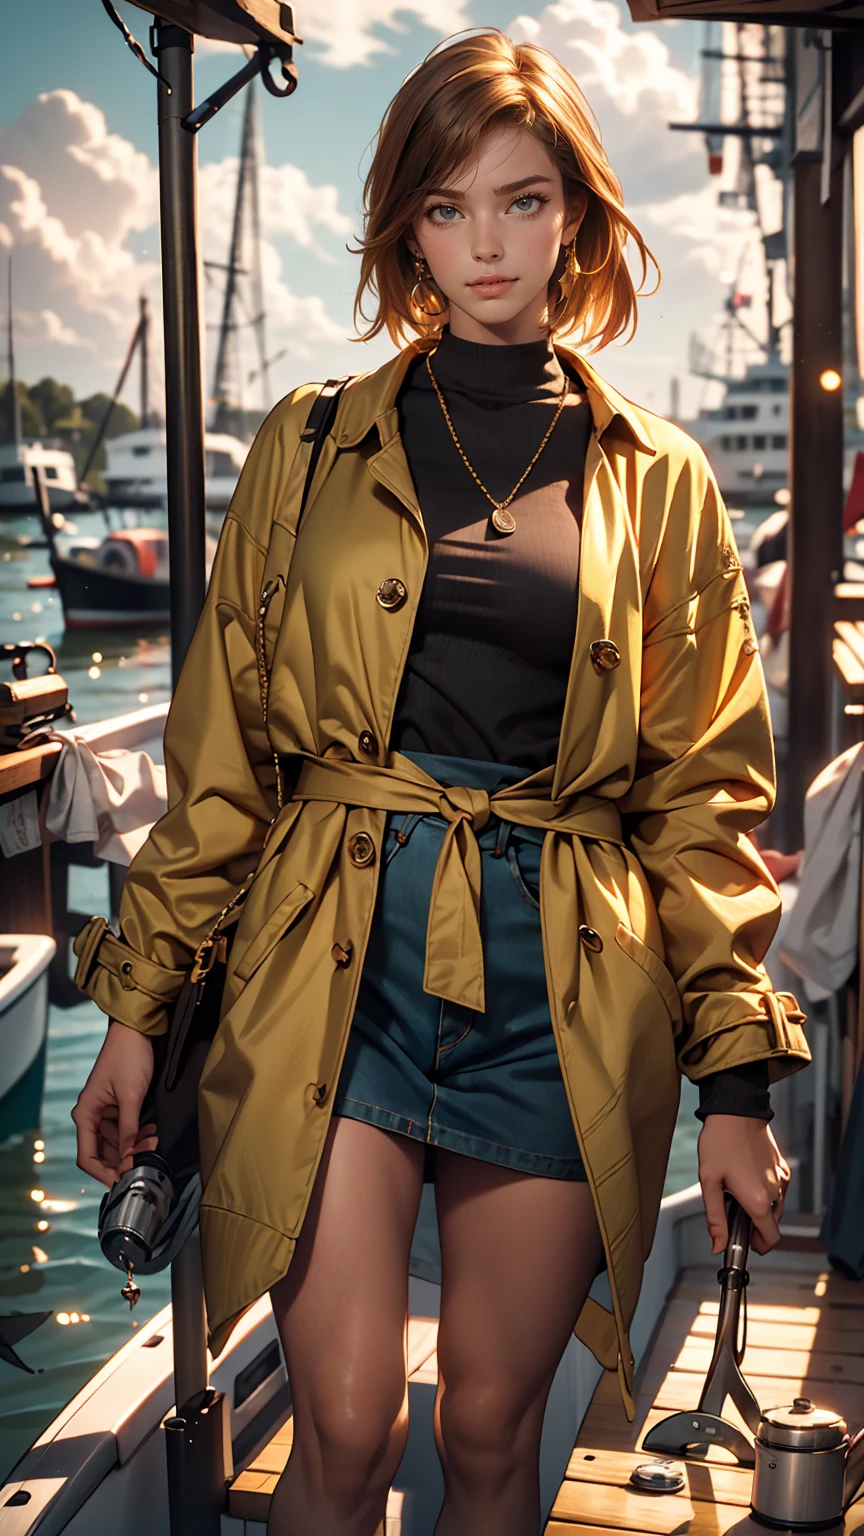 (masterpiece:1.2), highest quality, Beautiful female fisherman photo, Redhead, 40 years old, Wearing a yellow raincoat,  (On a fishing boat:1.3),  Dark Clouds, PhotoRealistic, HyperRealistic, Ultra-detailed, Analog Style, bent at the waist, Modest, Low Cut, Detailed skin, Matte skin, Soft lighting, Scattered beneath the surface, Realistic, Dark Shadows, masterpiece, highest quality, ultra Realistic, 8k, Golden Ratio, complicated, High detail, Film Photography, Soft Focus